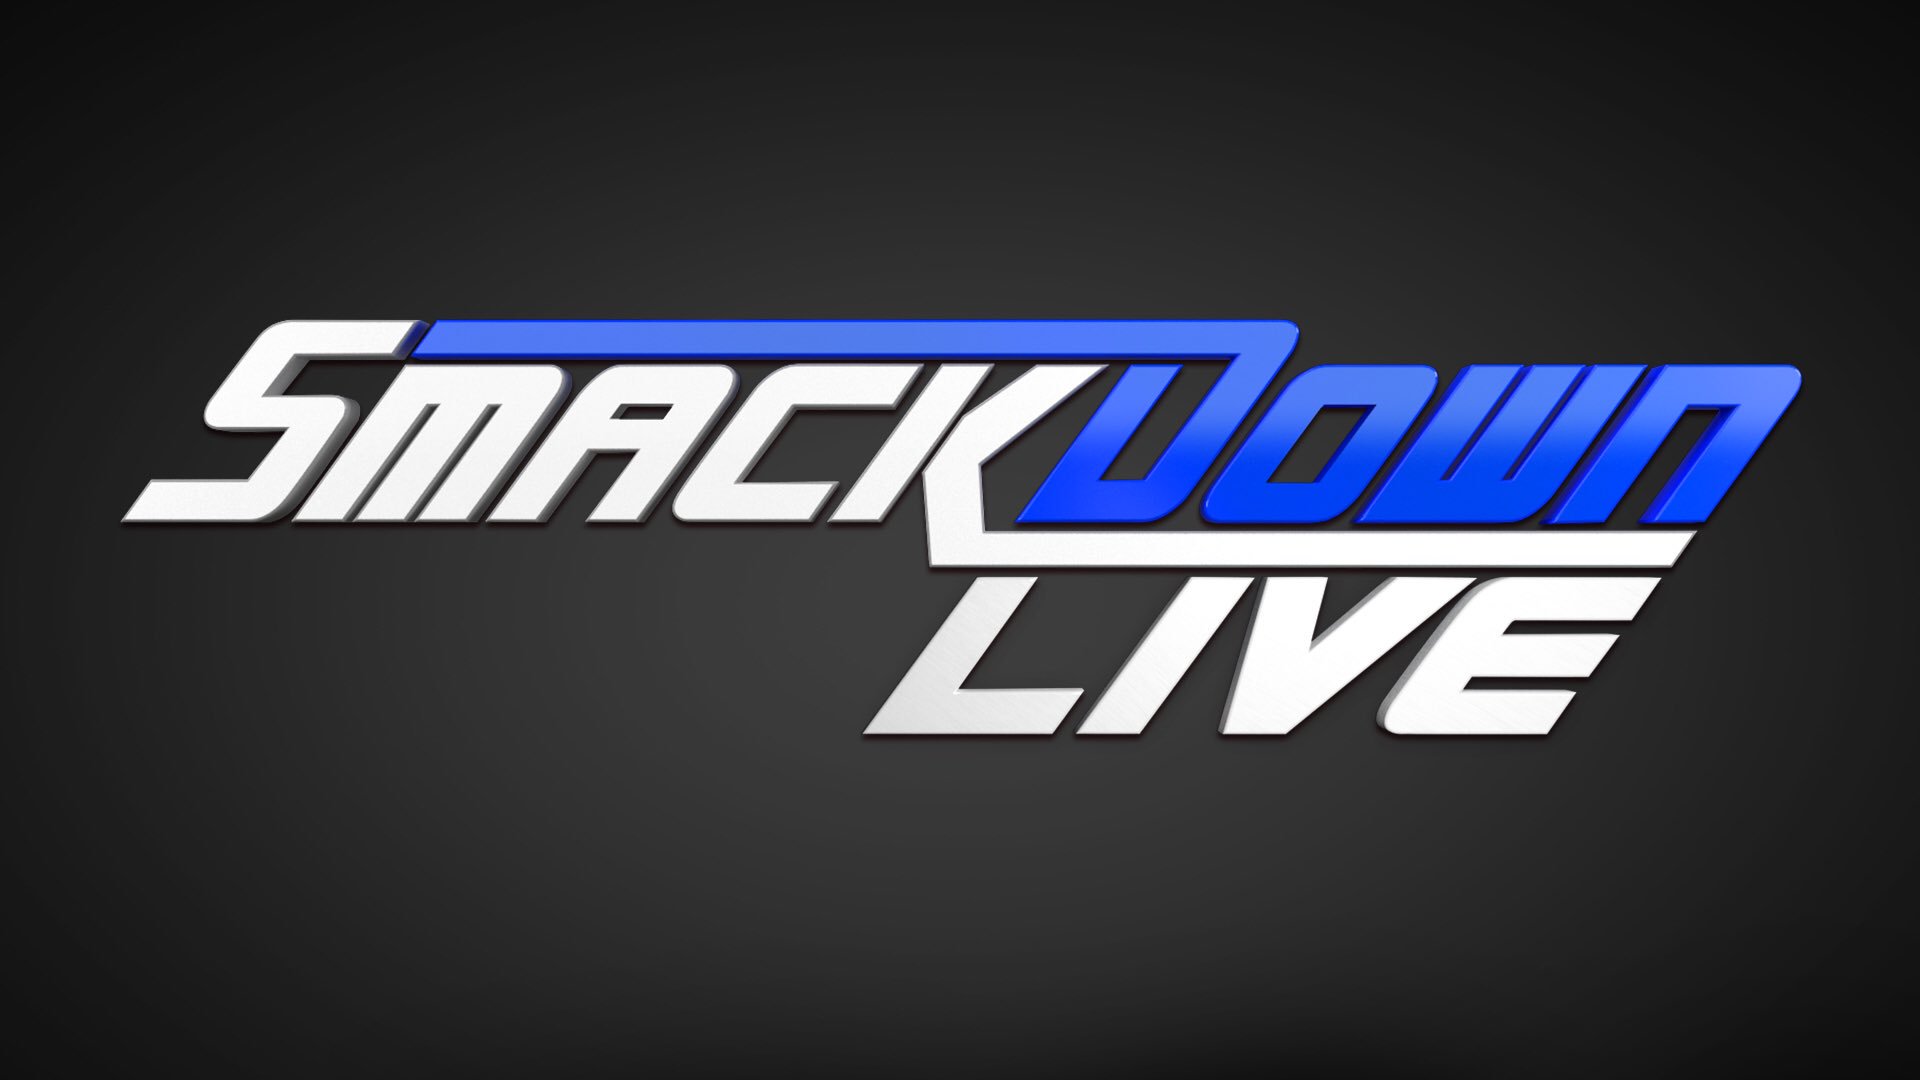 Come On, You Know You Didn’t Watch This Debate Either – Smackdown Live Recap October 4, 2016